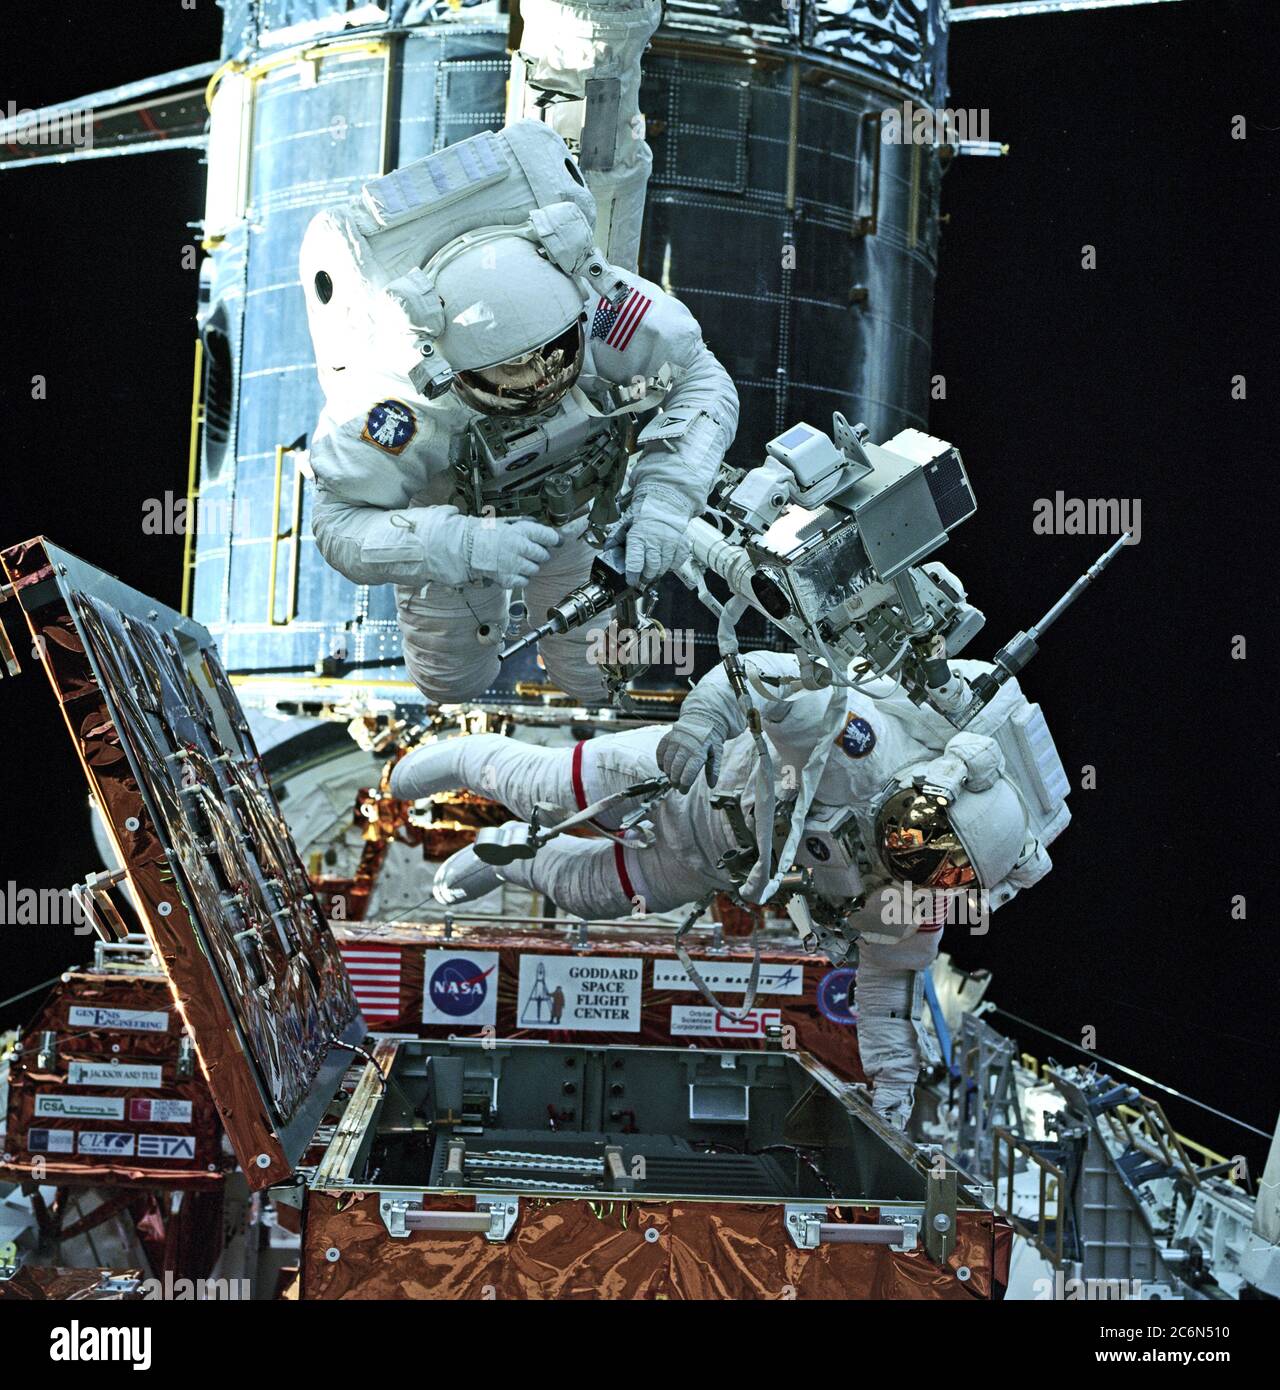 (13 Feb. 1997) --- Gearing up with tools for the first Extravehicular Activity (EVA-1) to service the Hubble Space Telescope (HST, background) are astronauts Steven L. Smith (left) and Mark C. Lee. They were among four STS-82 crewmembers who are to share several alternating two-member space walking work sessions during the flight.  The photograph was made from inside Discovery's cabin with a 70mm camera. Stock Photo